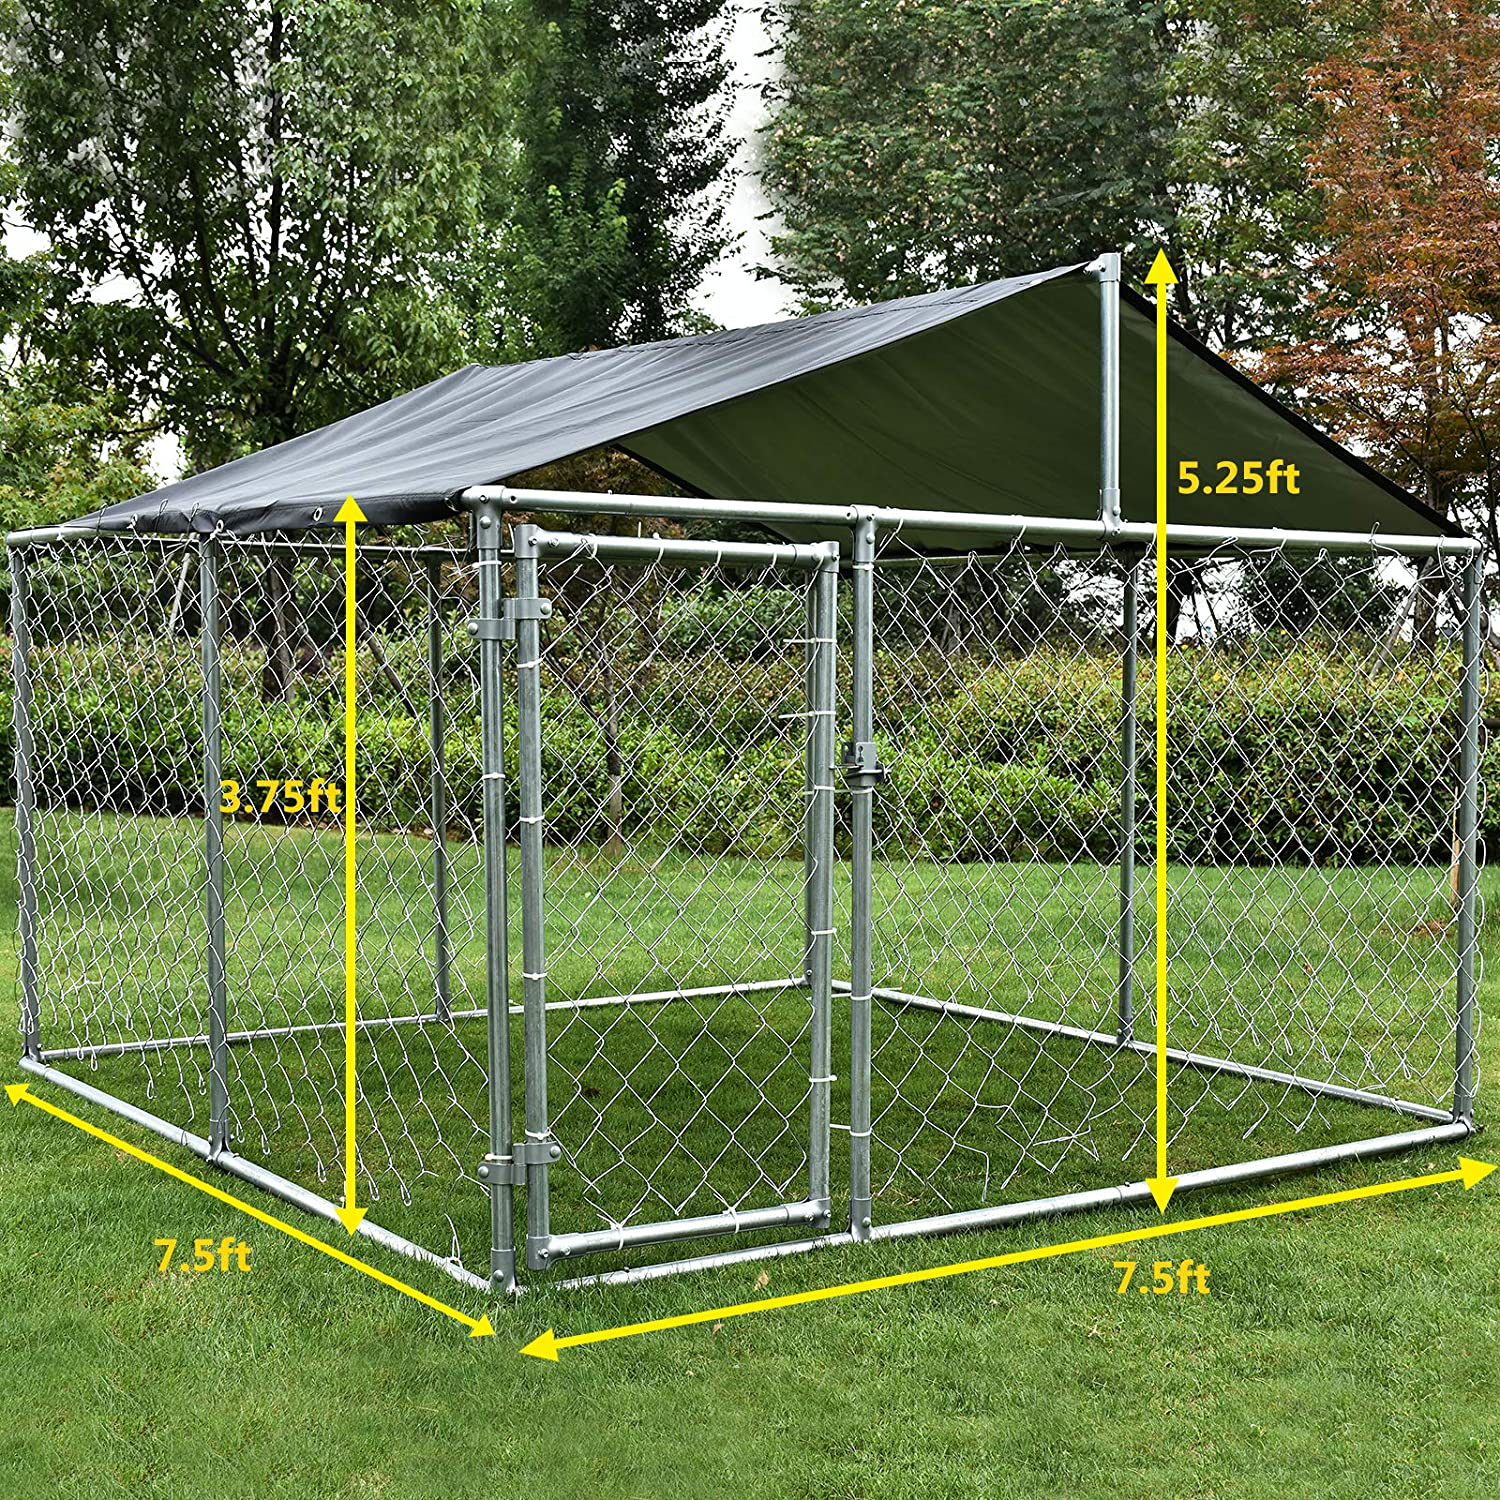 MAGIC UNION Dog Kennel Outdoor Metal Dog Cage outside Dog Fence Pet Enclosure Fencing with Water-Resistant Cover Roof Backyard Dog Run House (Basic) Animals & Pet Supplies > Pet Supplies > Dog Supplies > Dog Kennels & Runs MAGIC UNION   